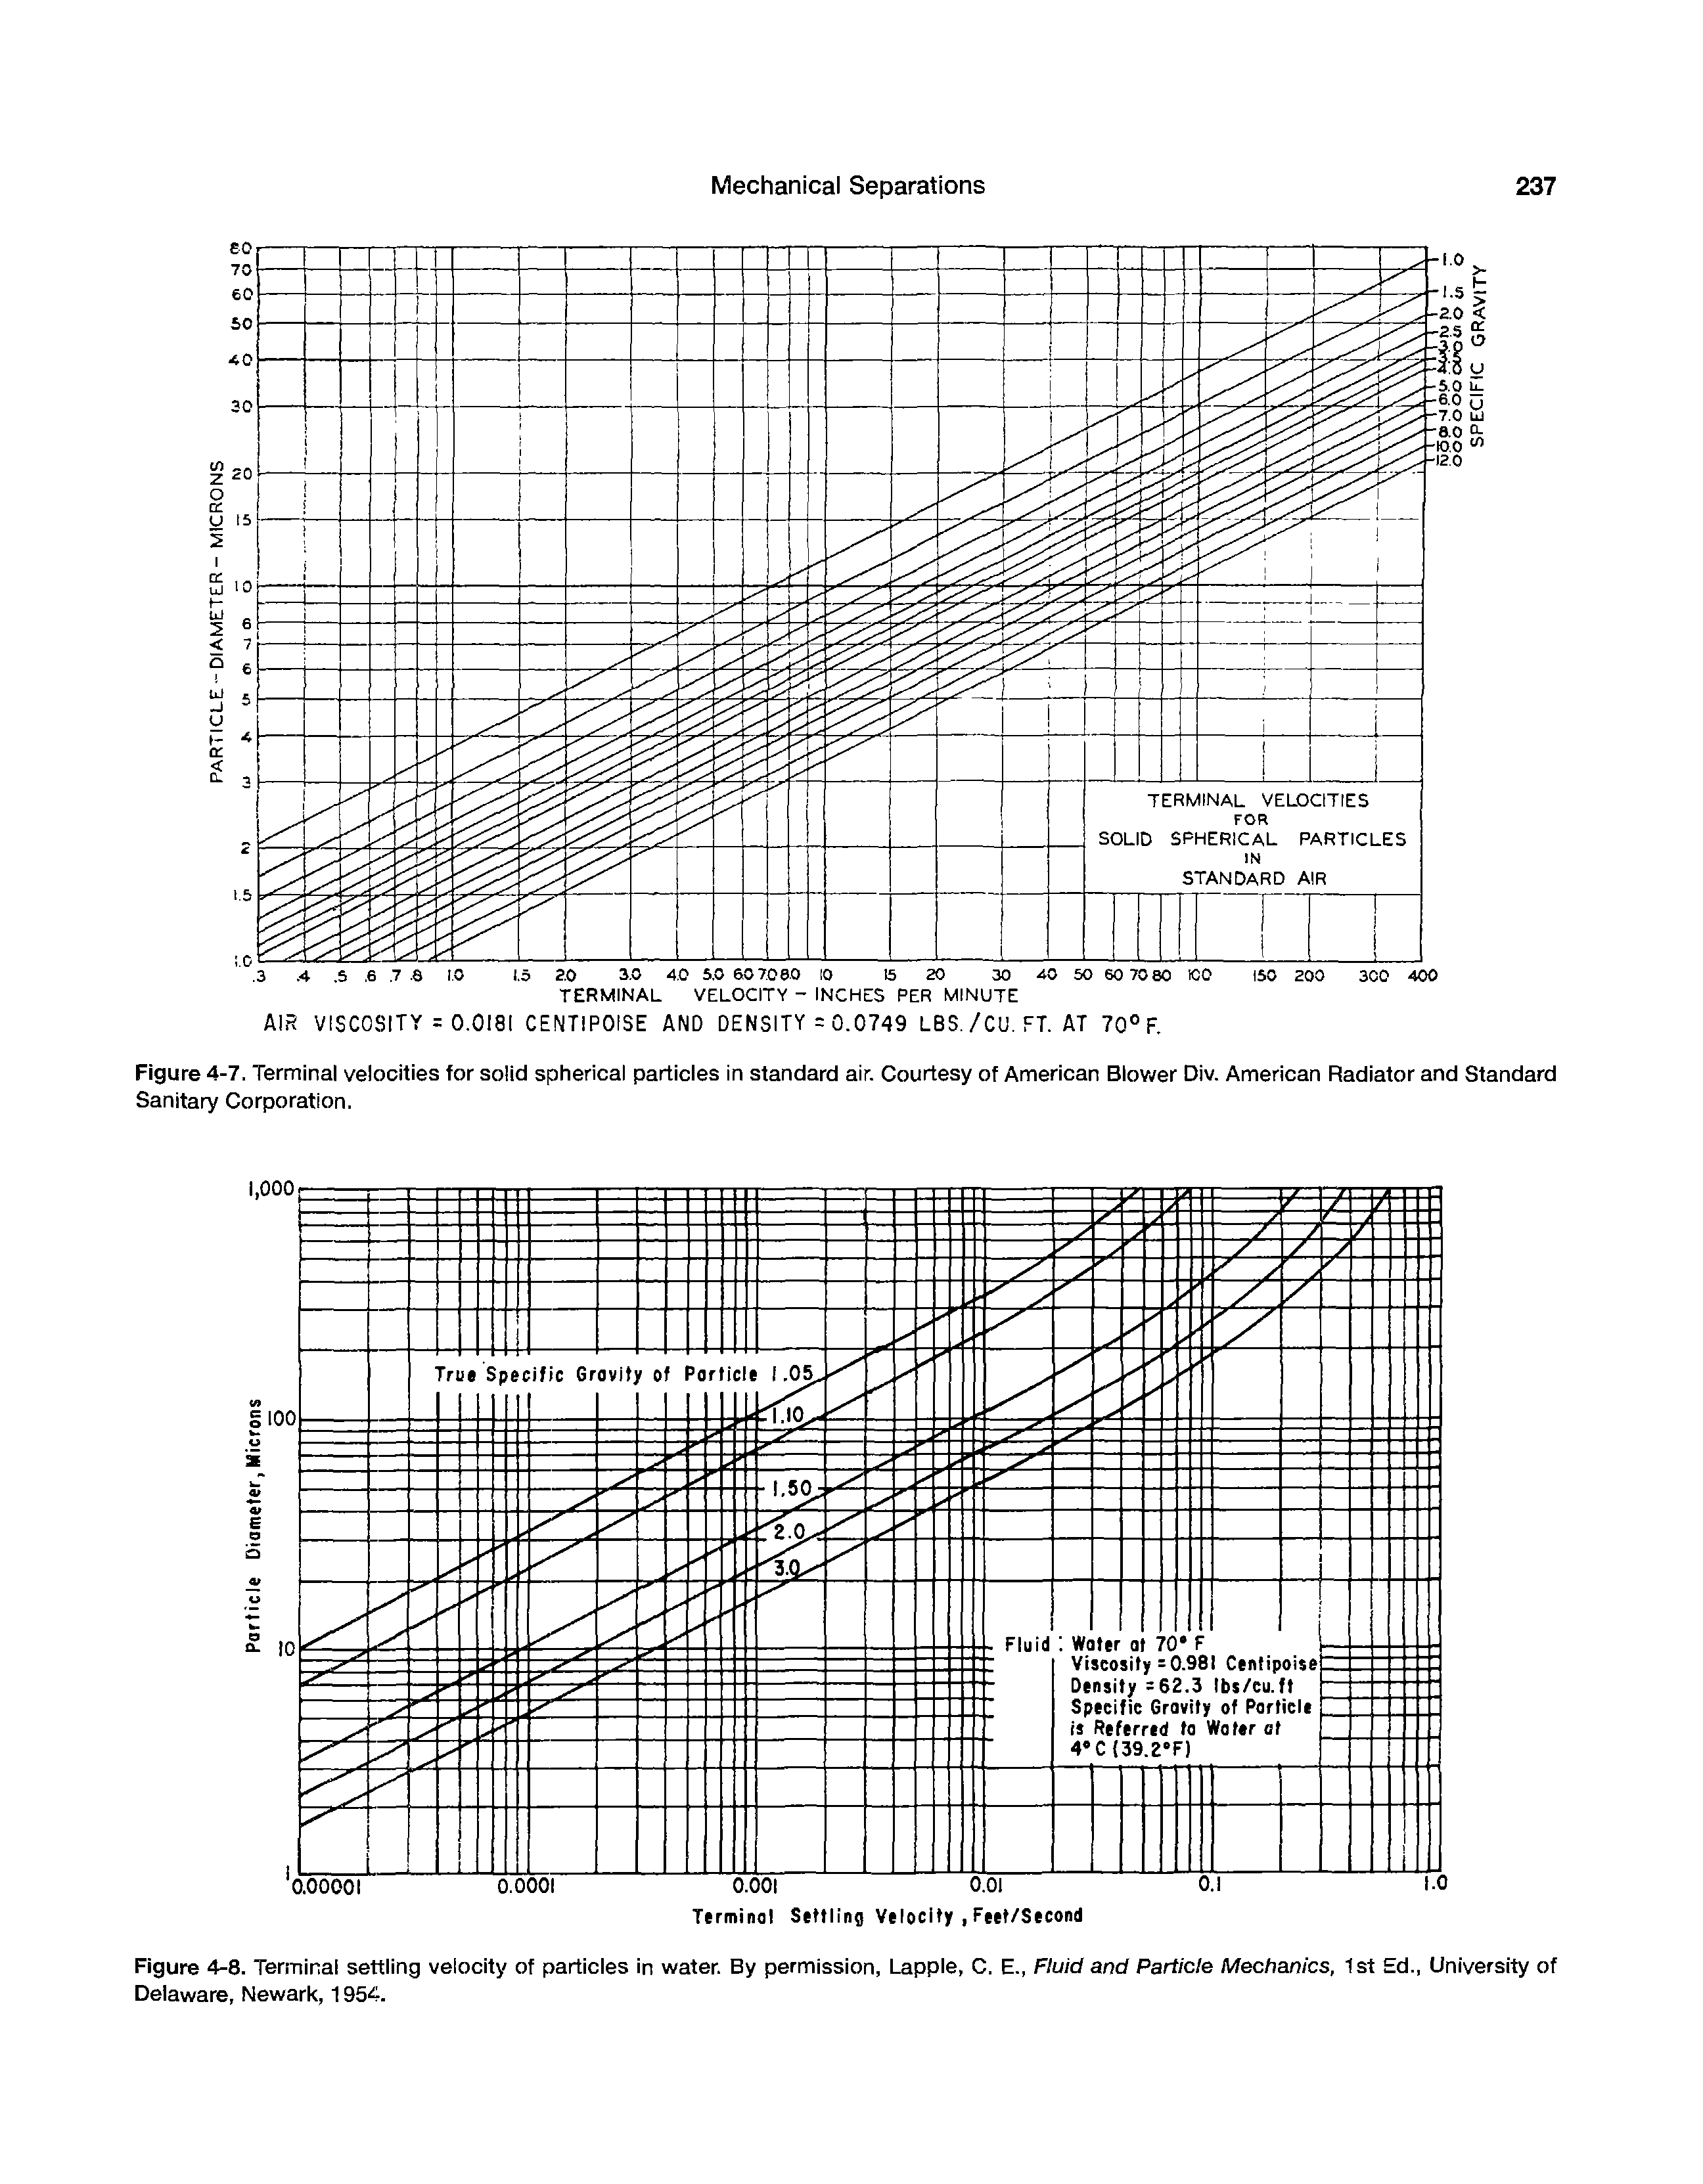 Figure 4-7. Terminal velocities for solid spherical particles in standard air. Courtesy of American Blov er Div. American Radiator and Standard Sanitary Corporation.